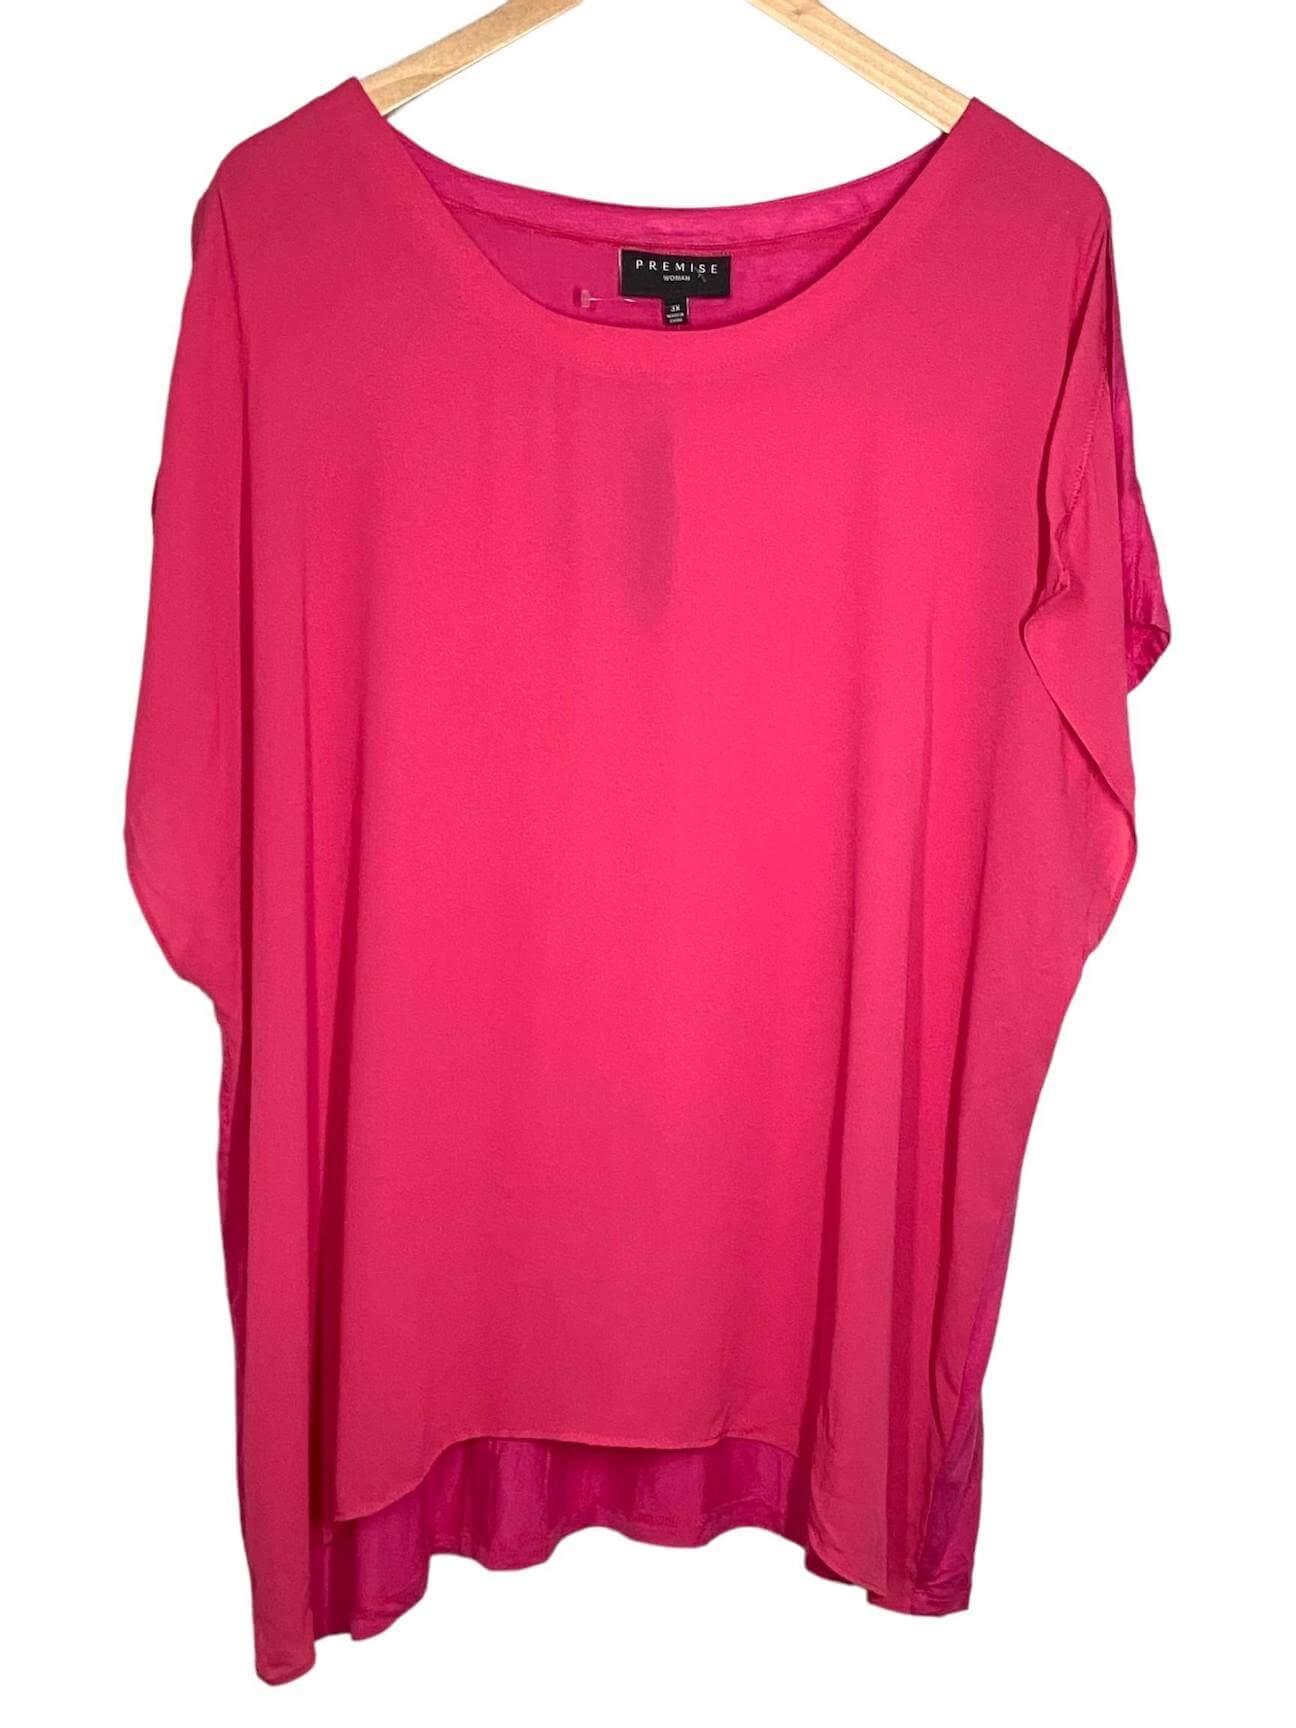 Bright Winter PREMISE pink punch blouse